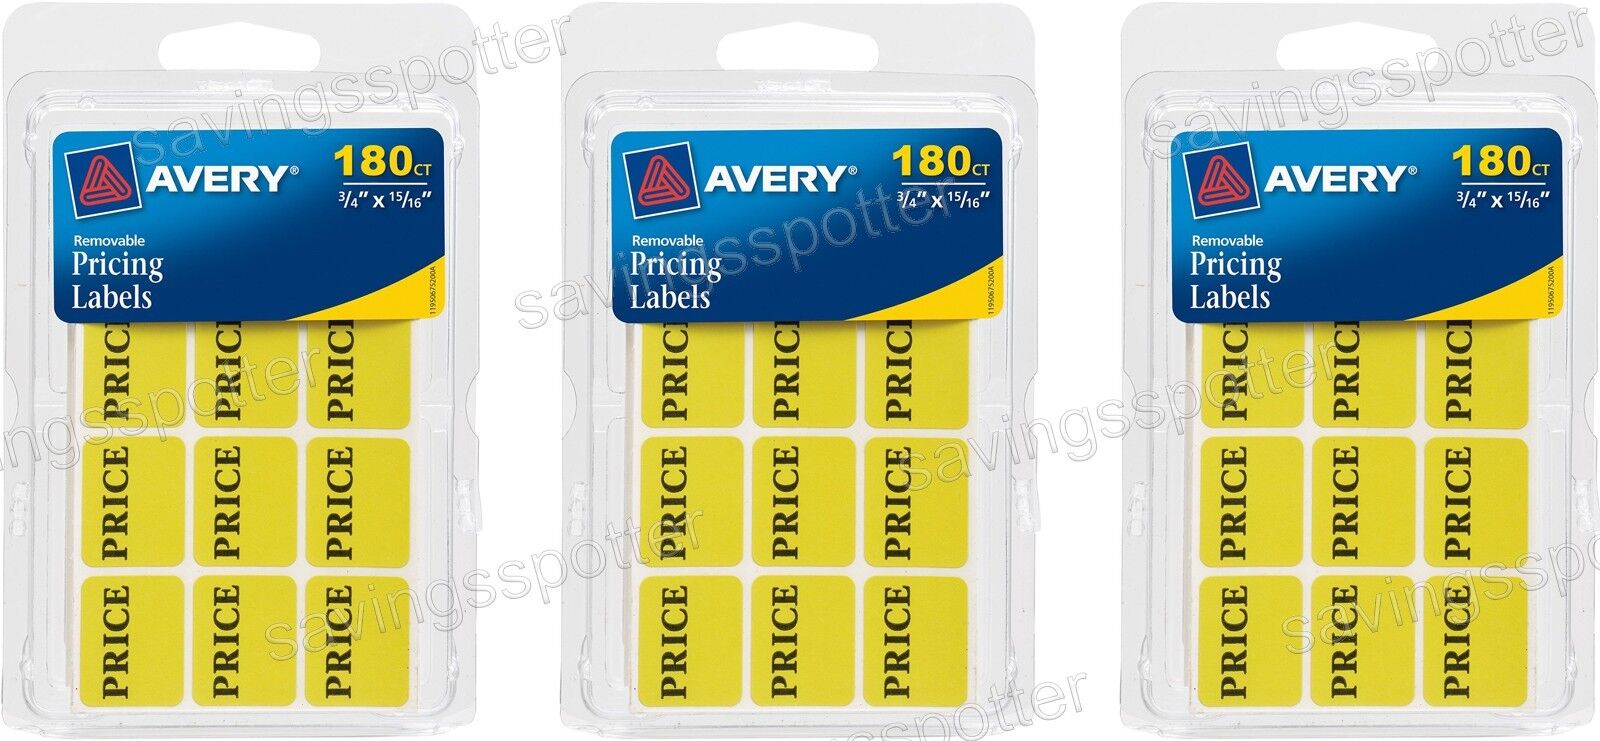 540 Avery Pricing Labels Price Tag Removable Adhesive Rectangular Yellow Sticker Avery Dennison Does Not Apply - фотография #2